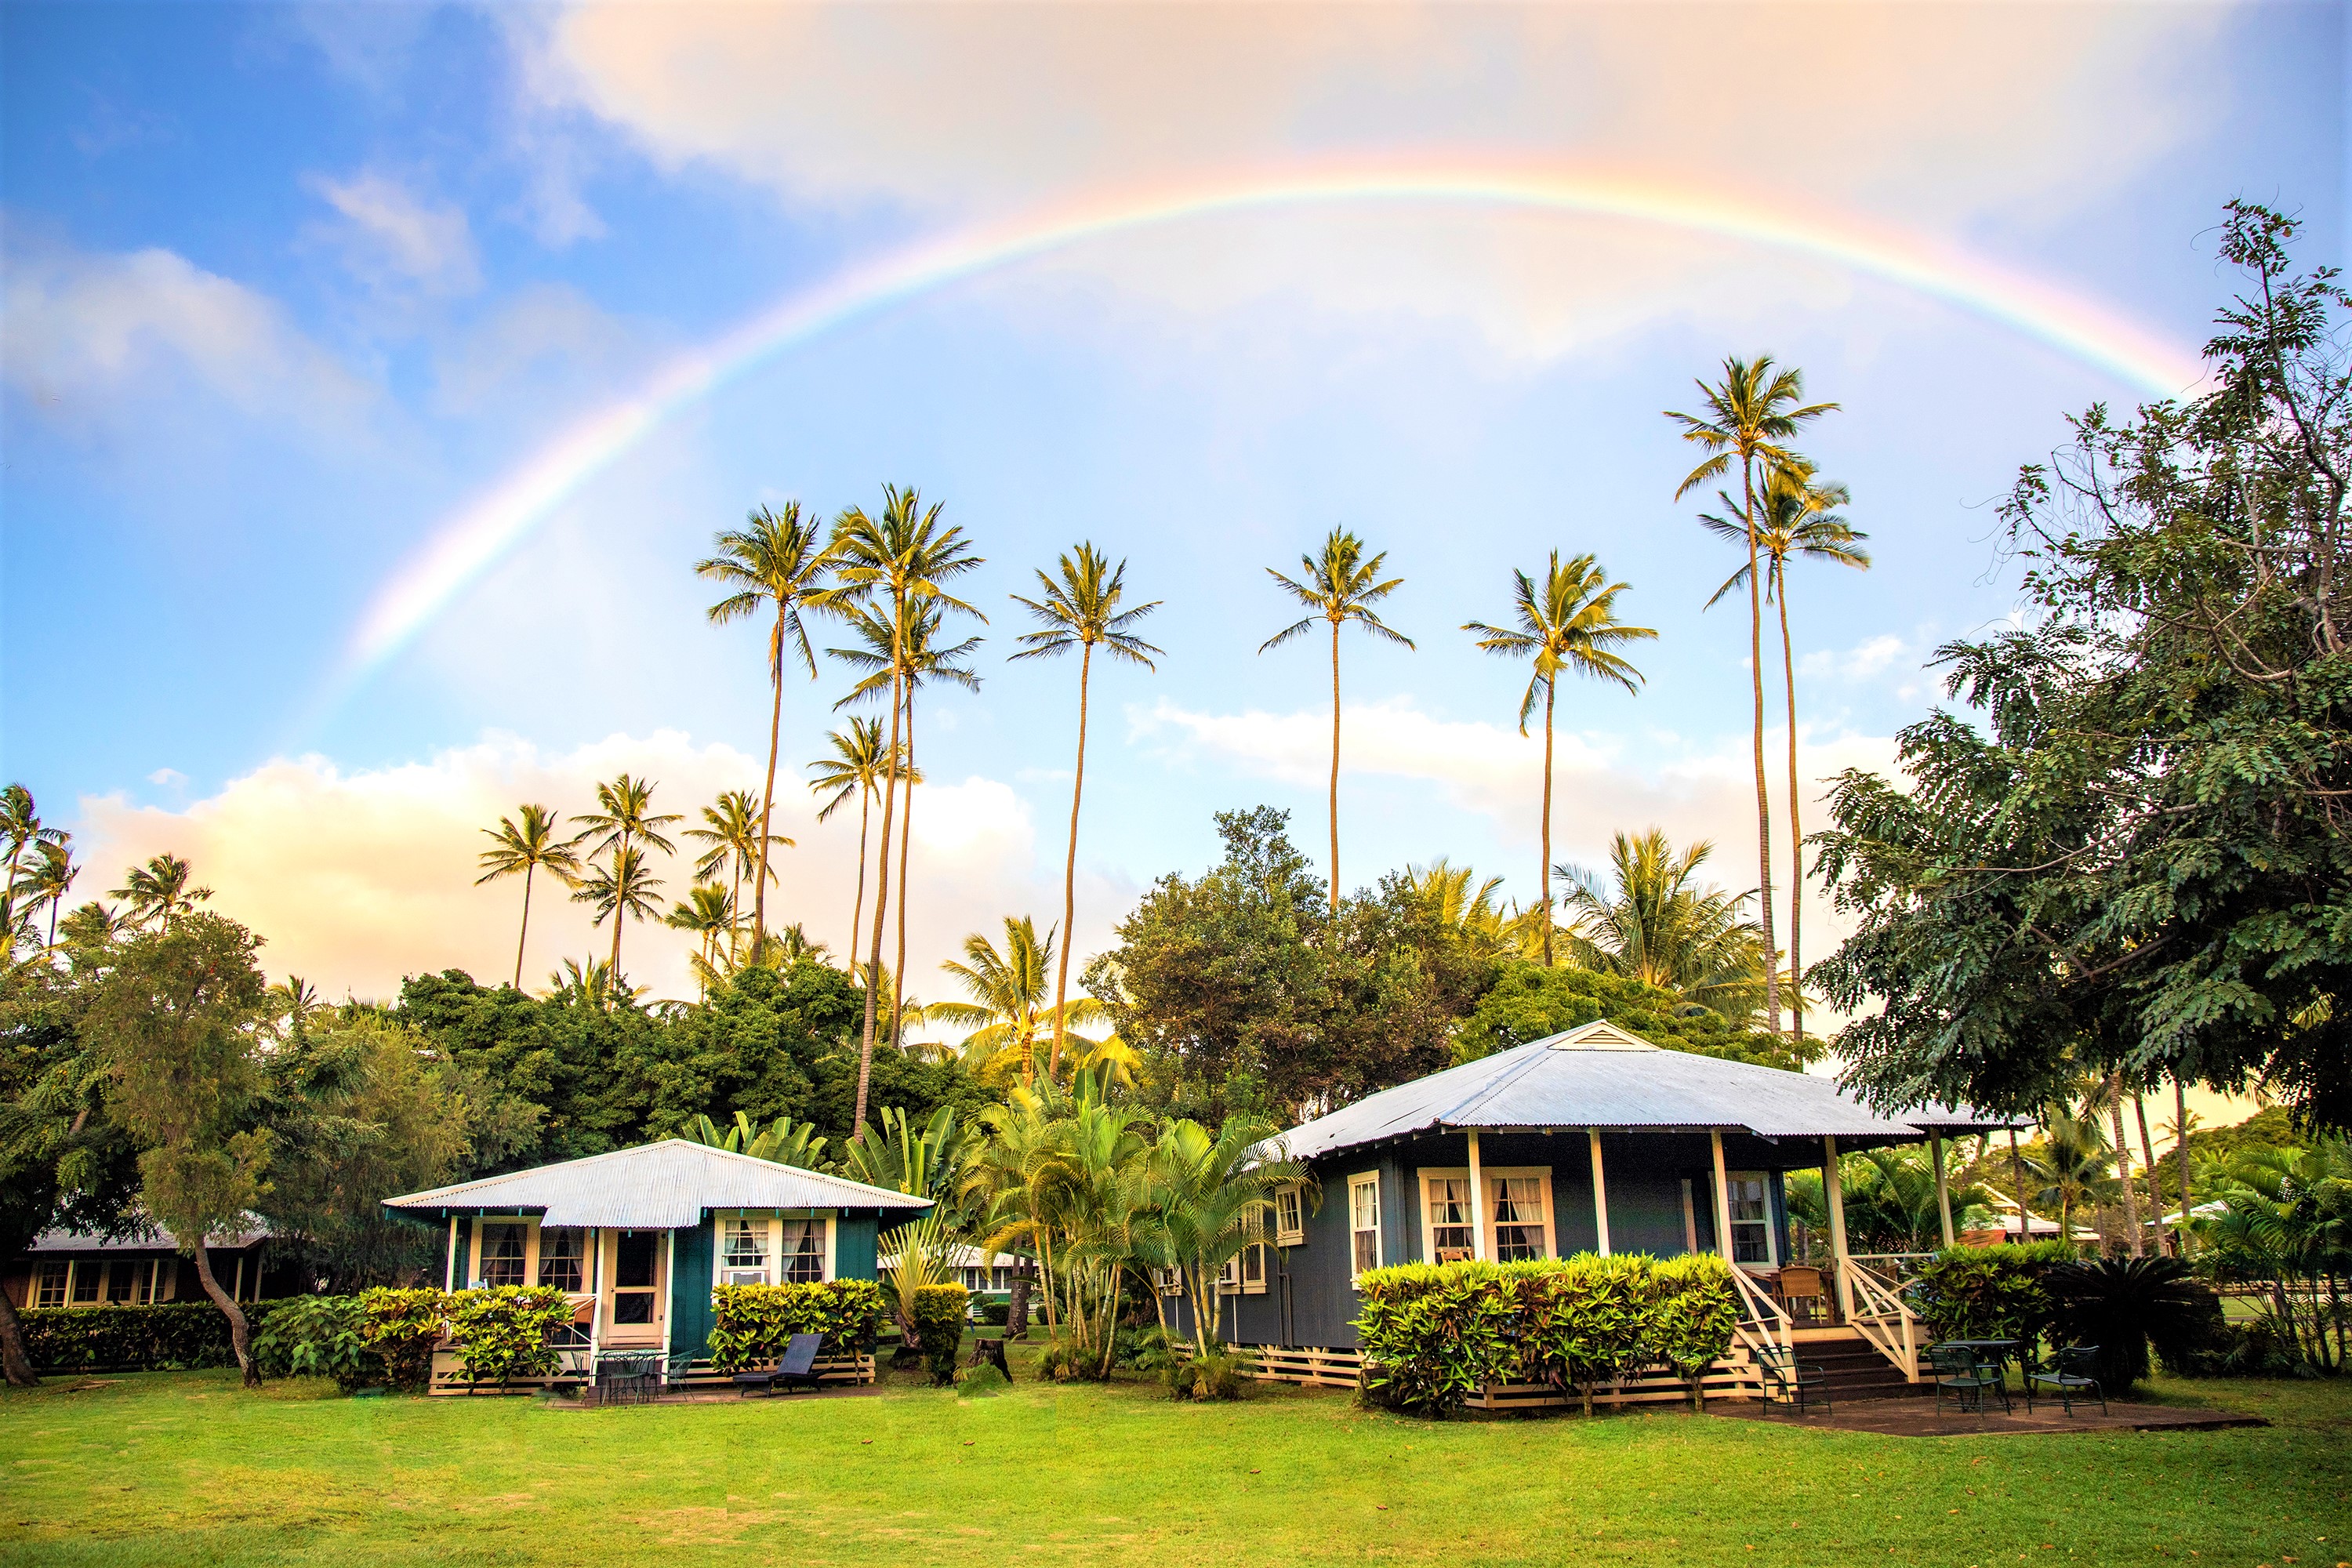 Rainbow Over Cottages (1)